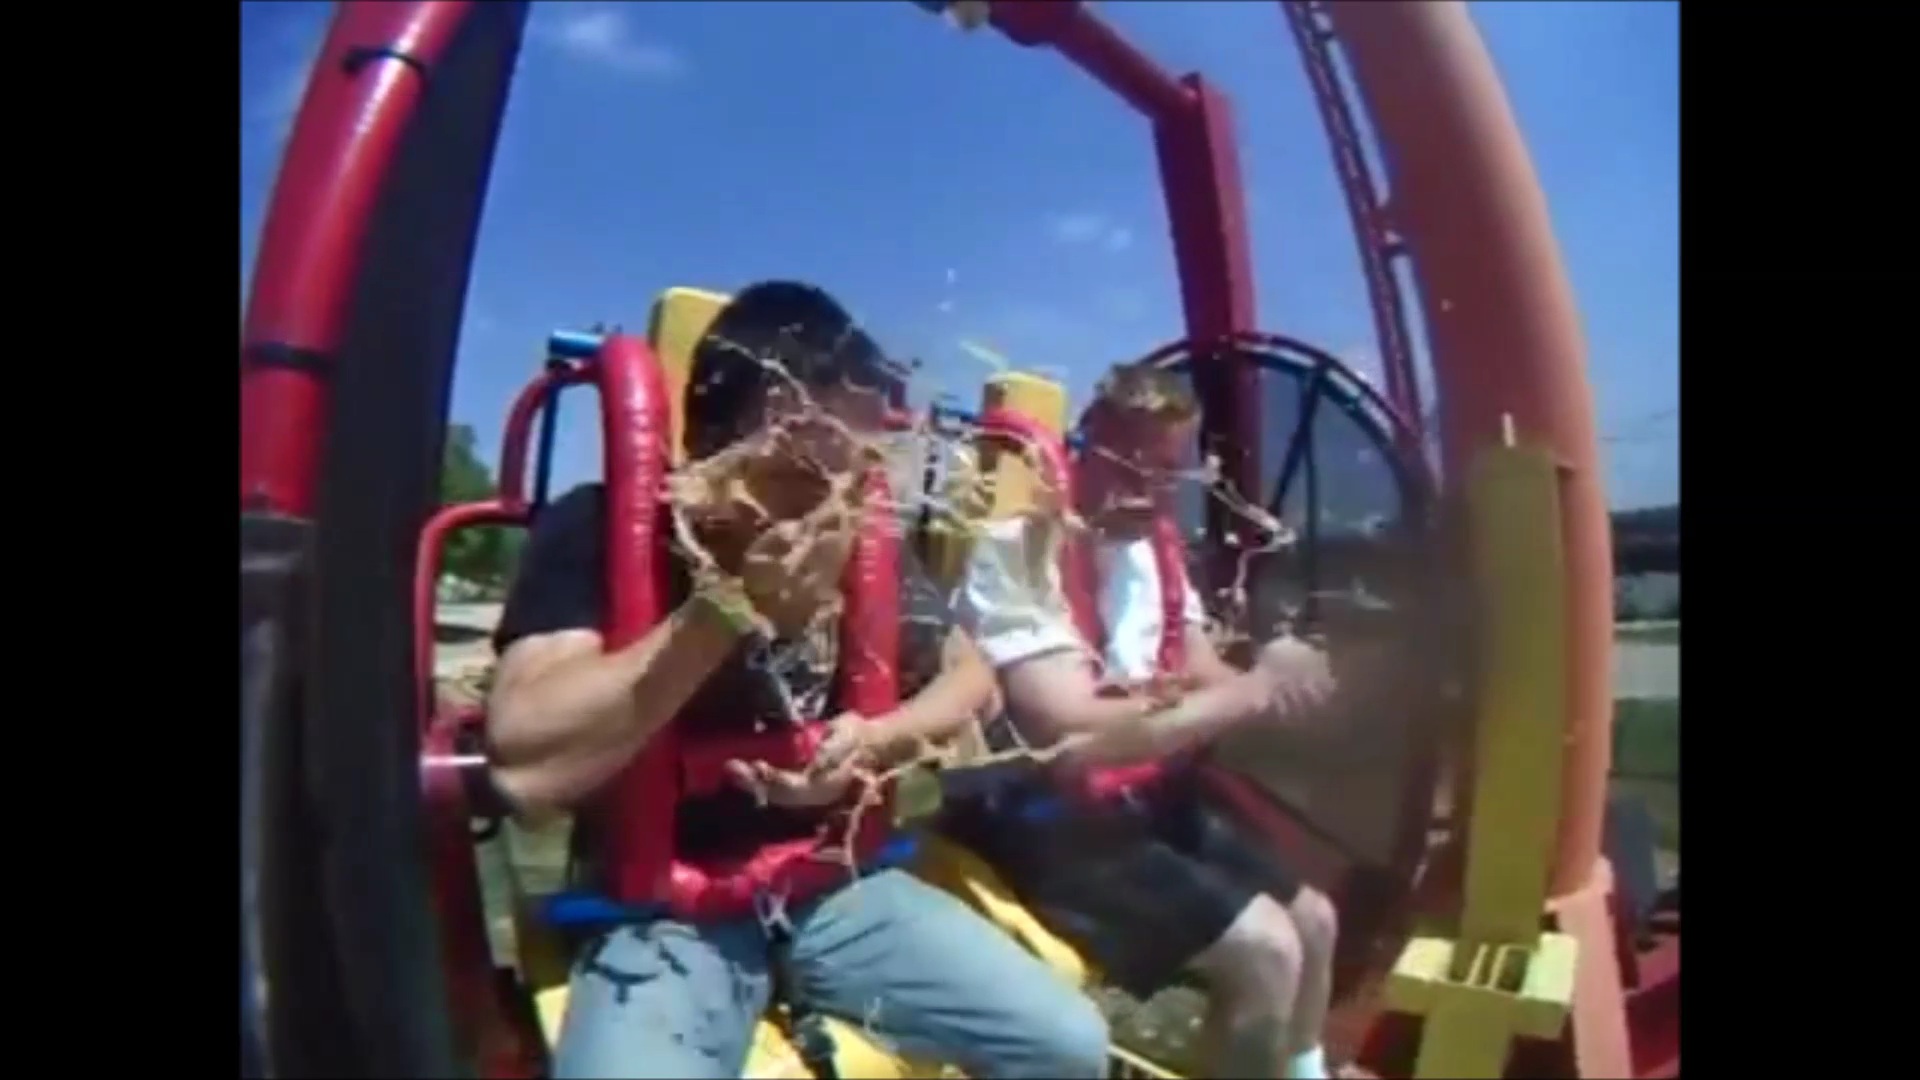 Guy Explodes All Over Amusement Park Ride